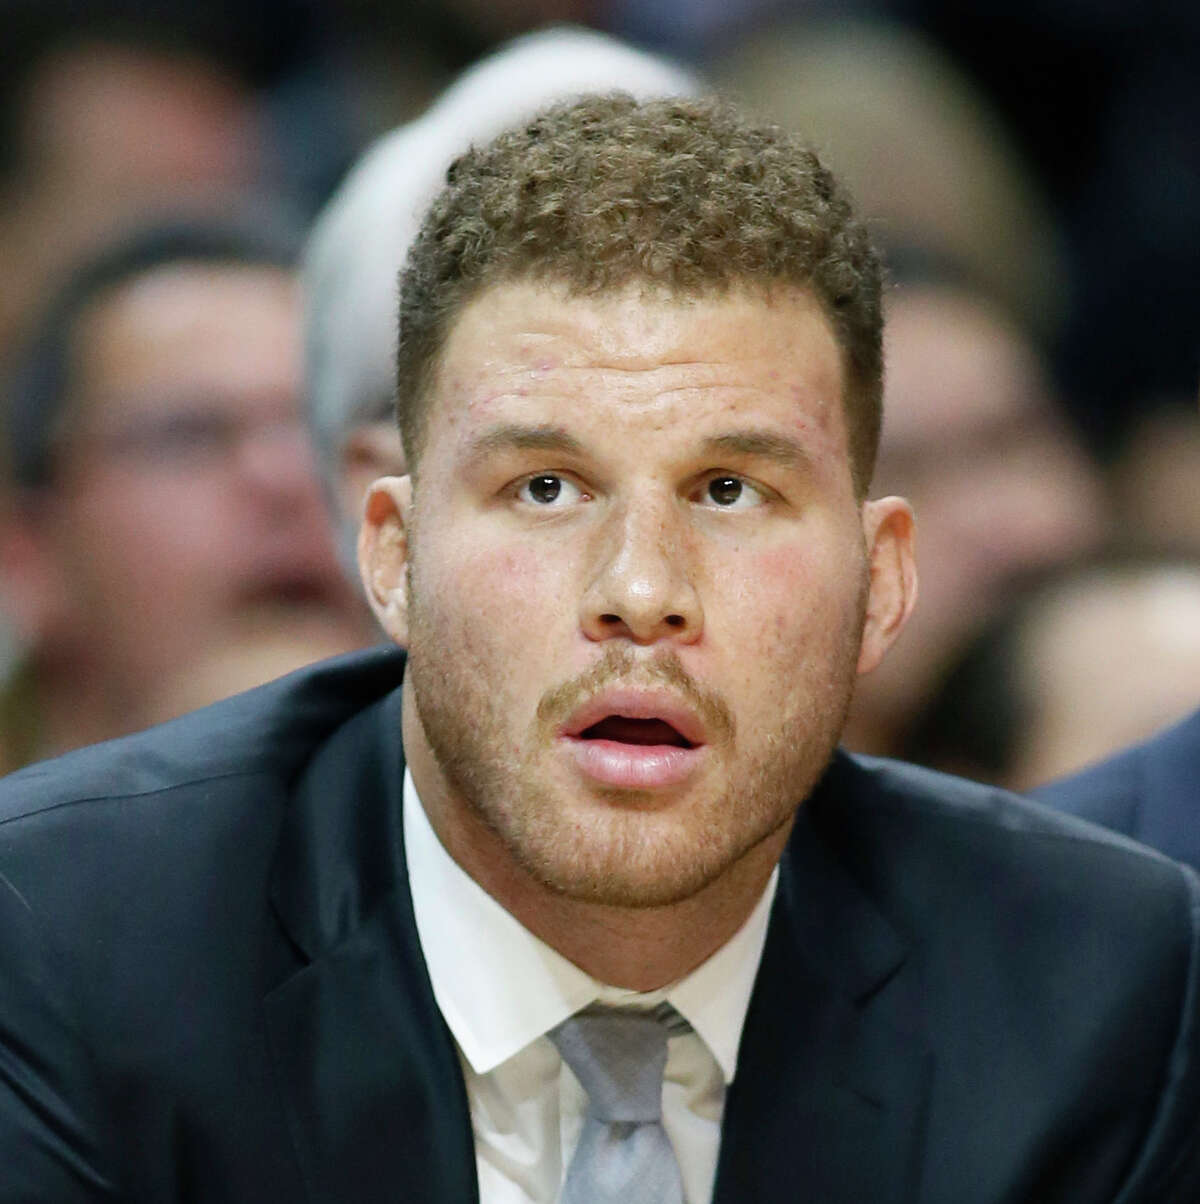 Blake Griffin hurt his hand in an altercation with a member of the Los Angeles Clippers’ staff on the team’s current road trip and will be sidelined for as long as six weeks.